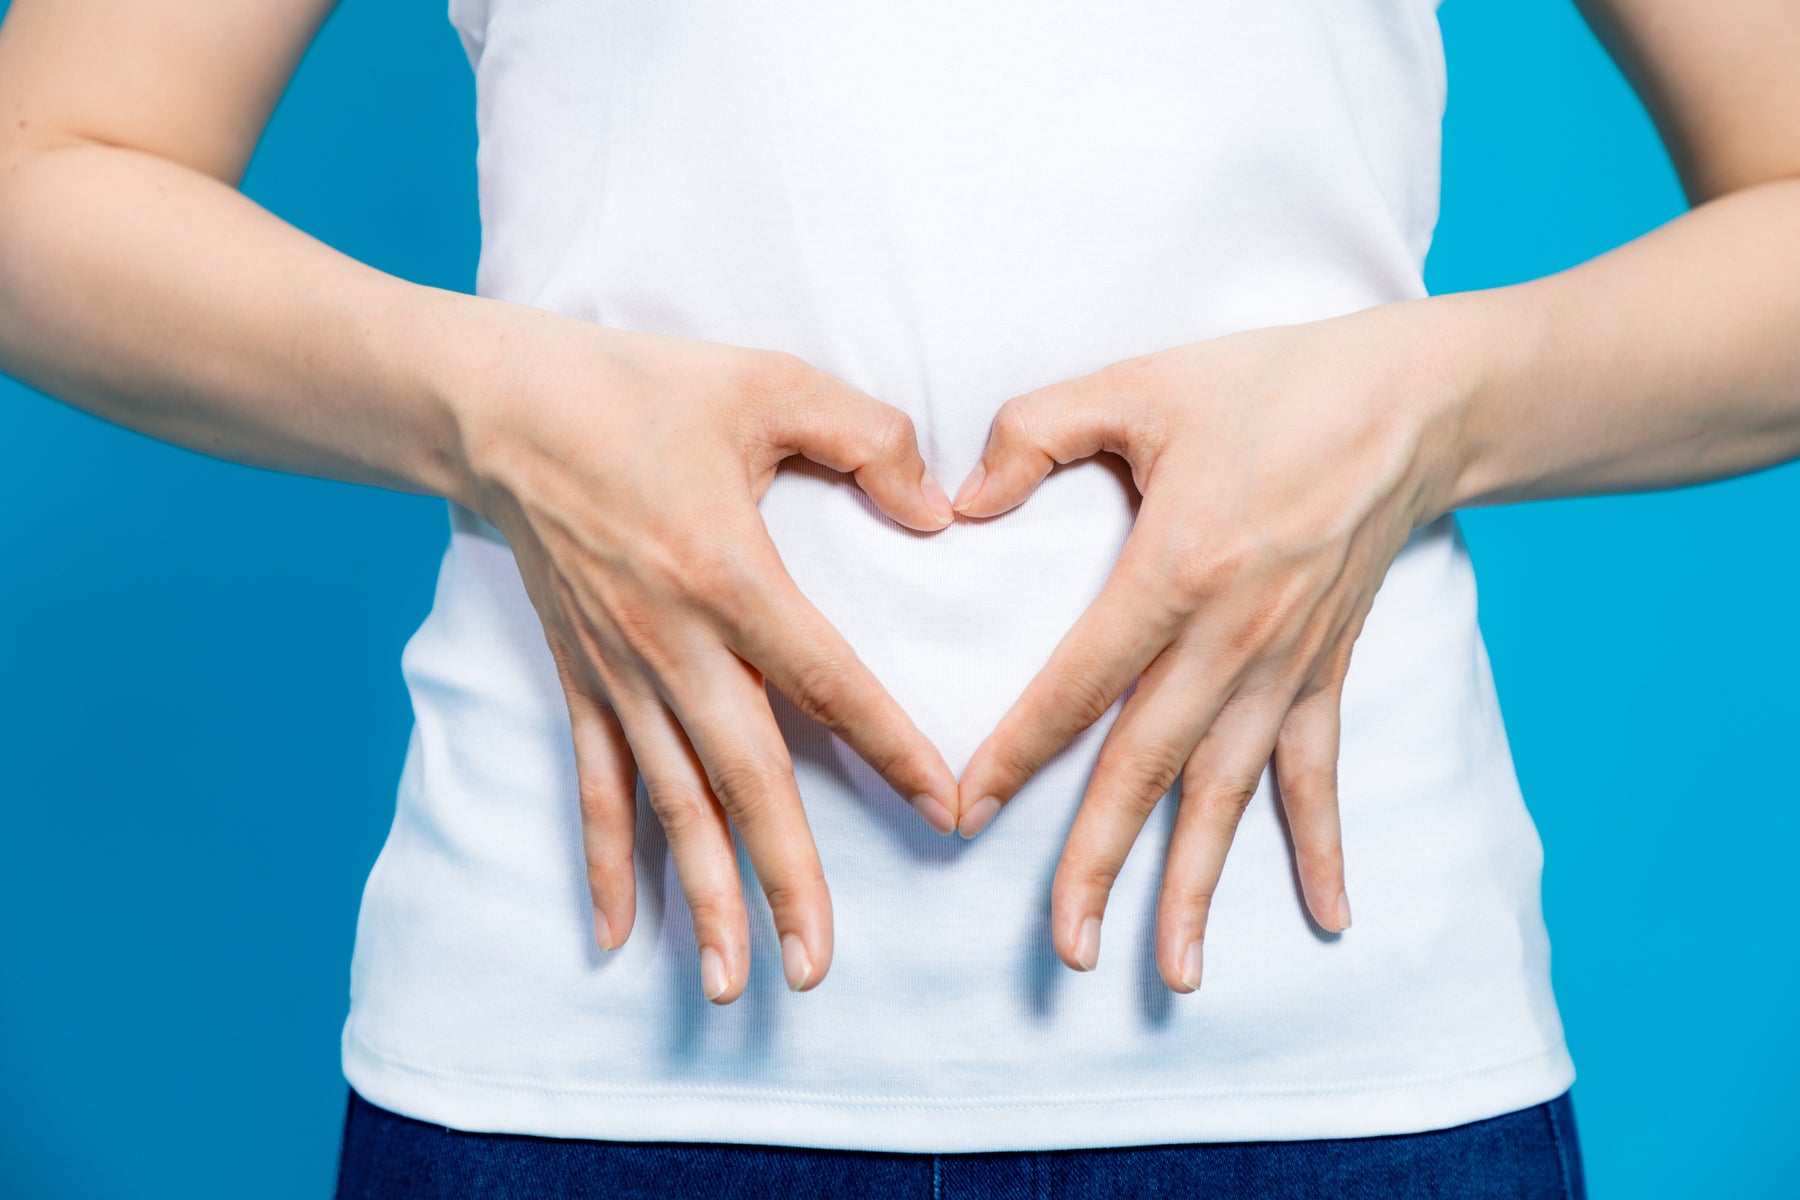 What Are the Best Probiotics? 15 Healthy Bacteria Strains for Gut Support